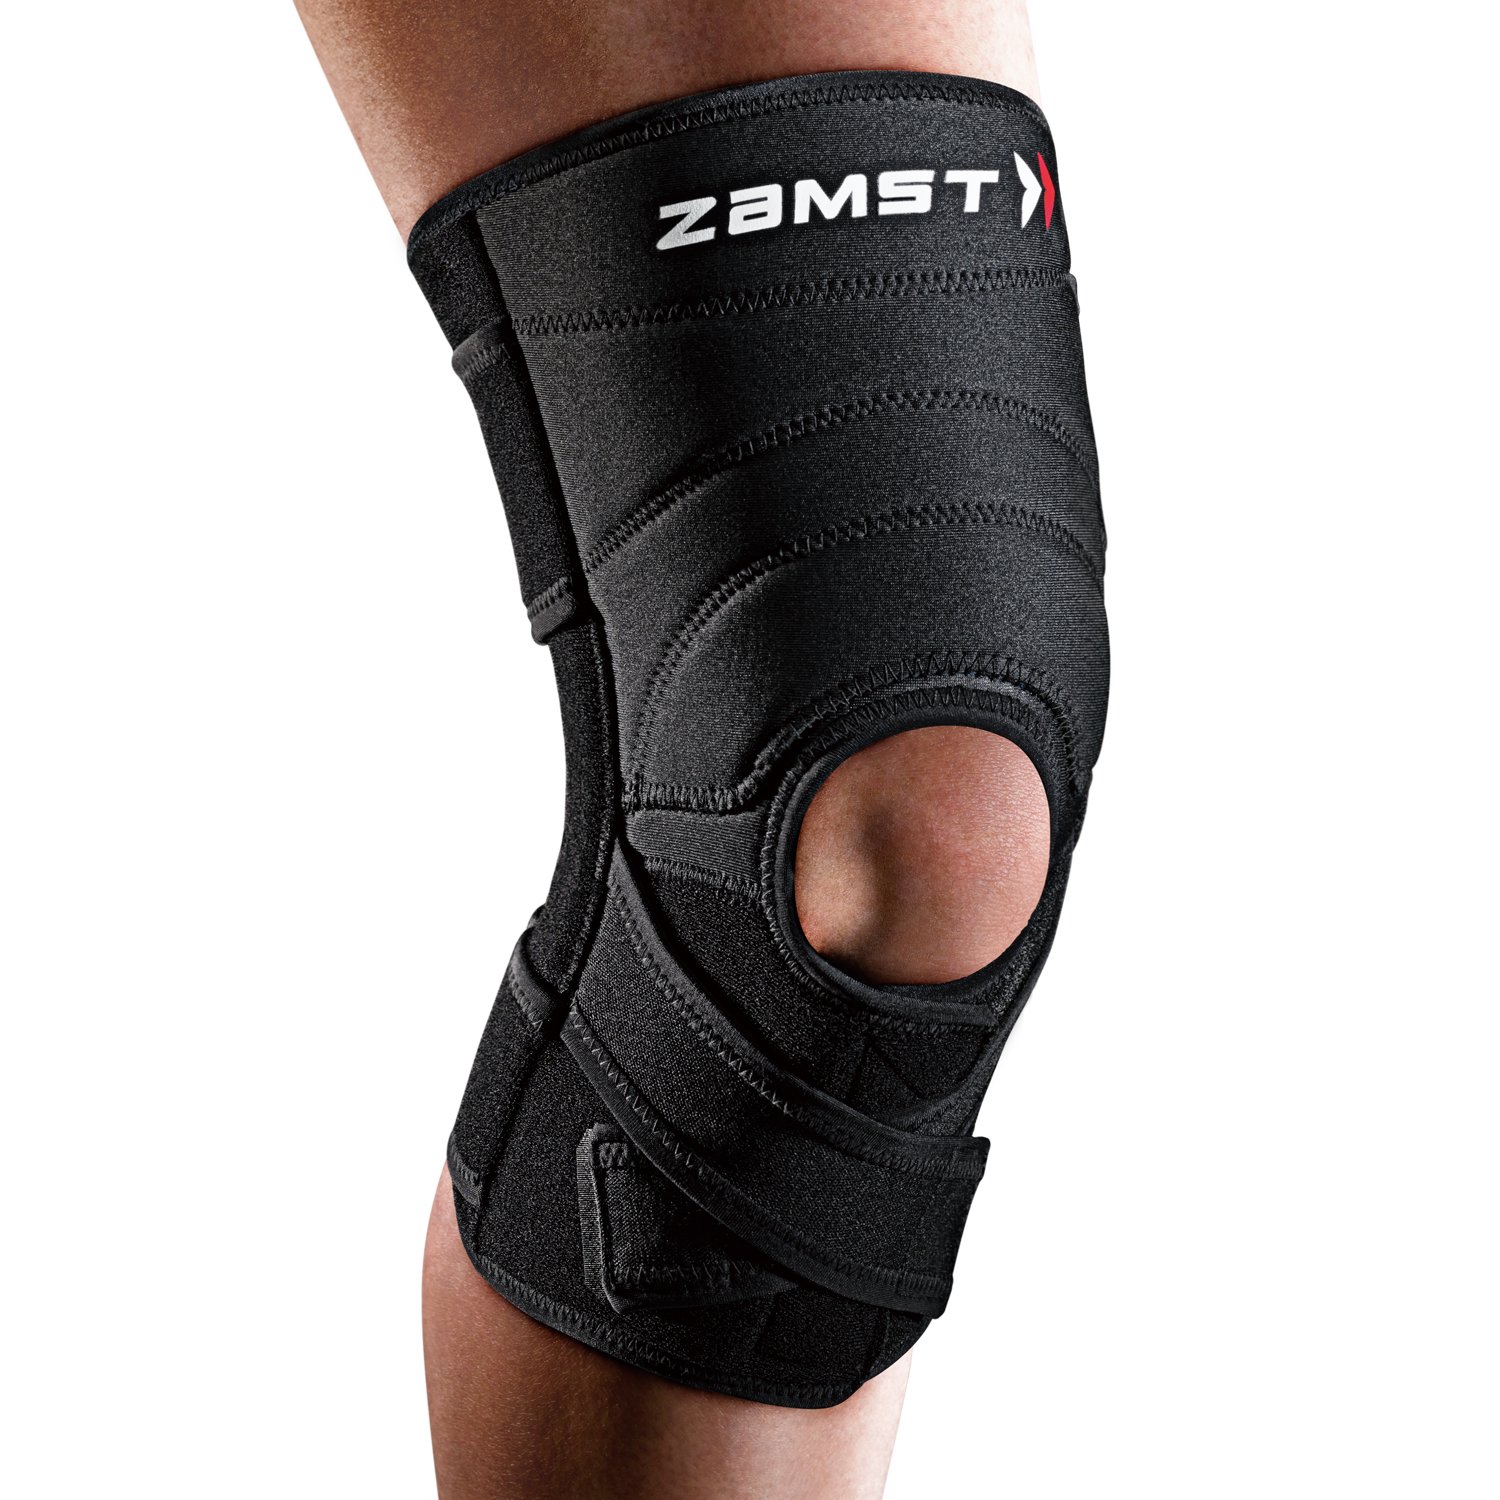 Zamst ZK-7 Sports Knee Brace For Moderate Sprains Of the ACL MCL LCL - Large